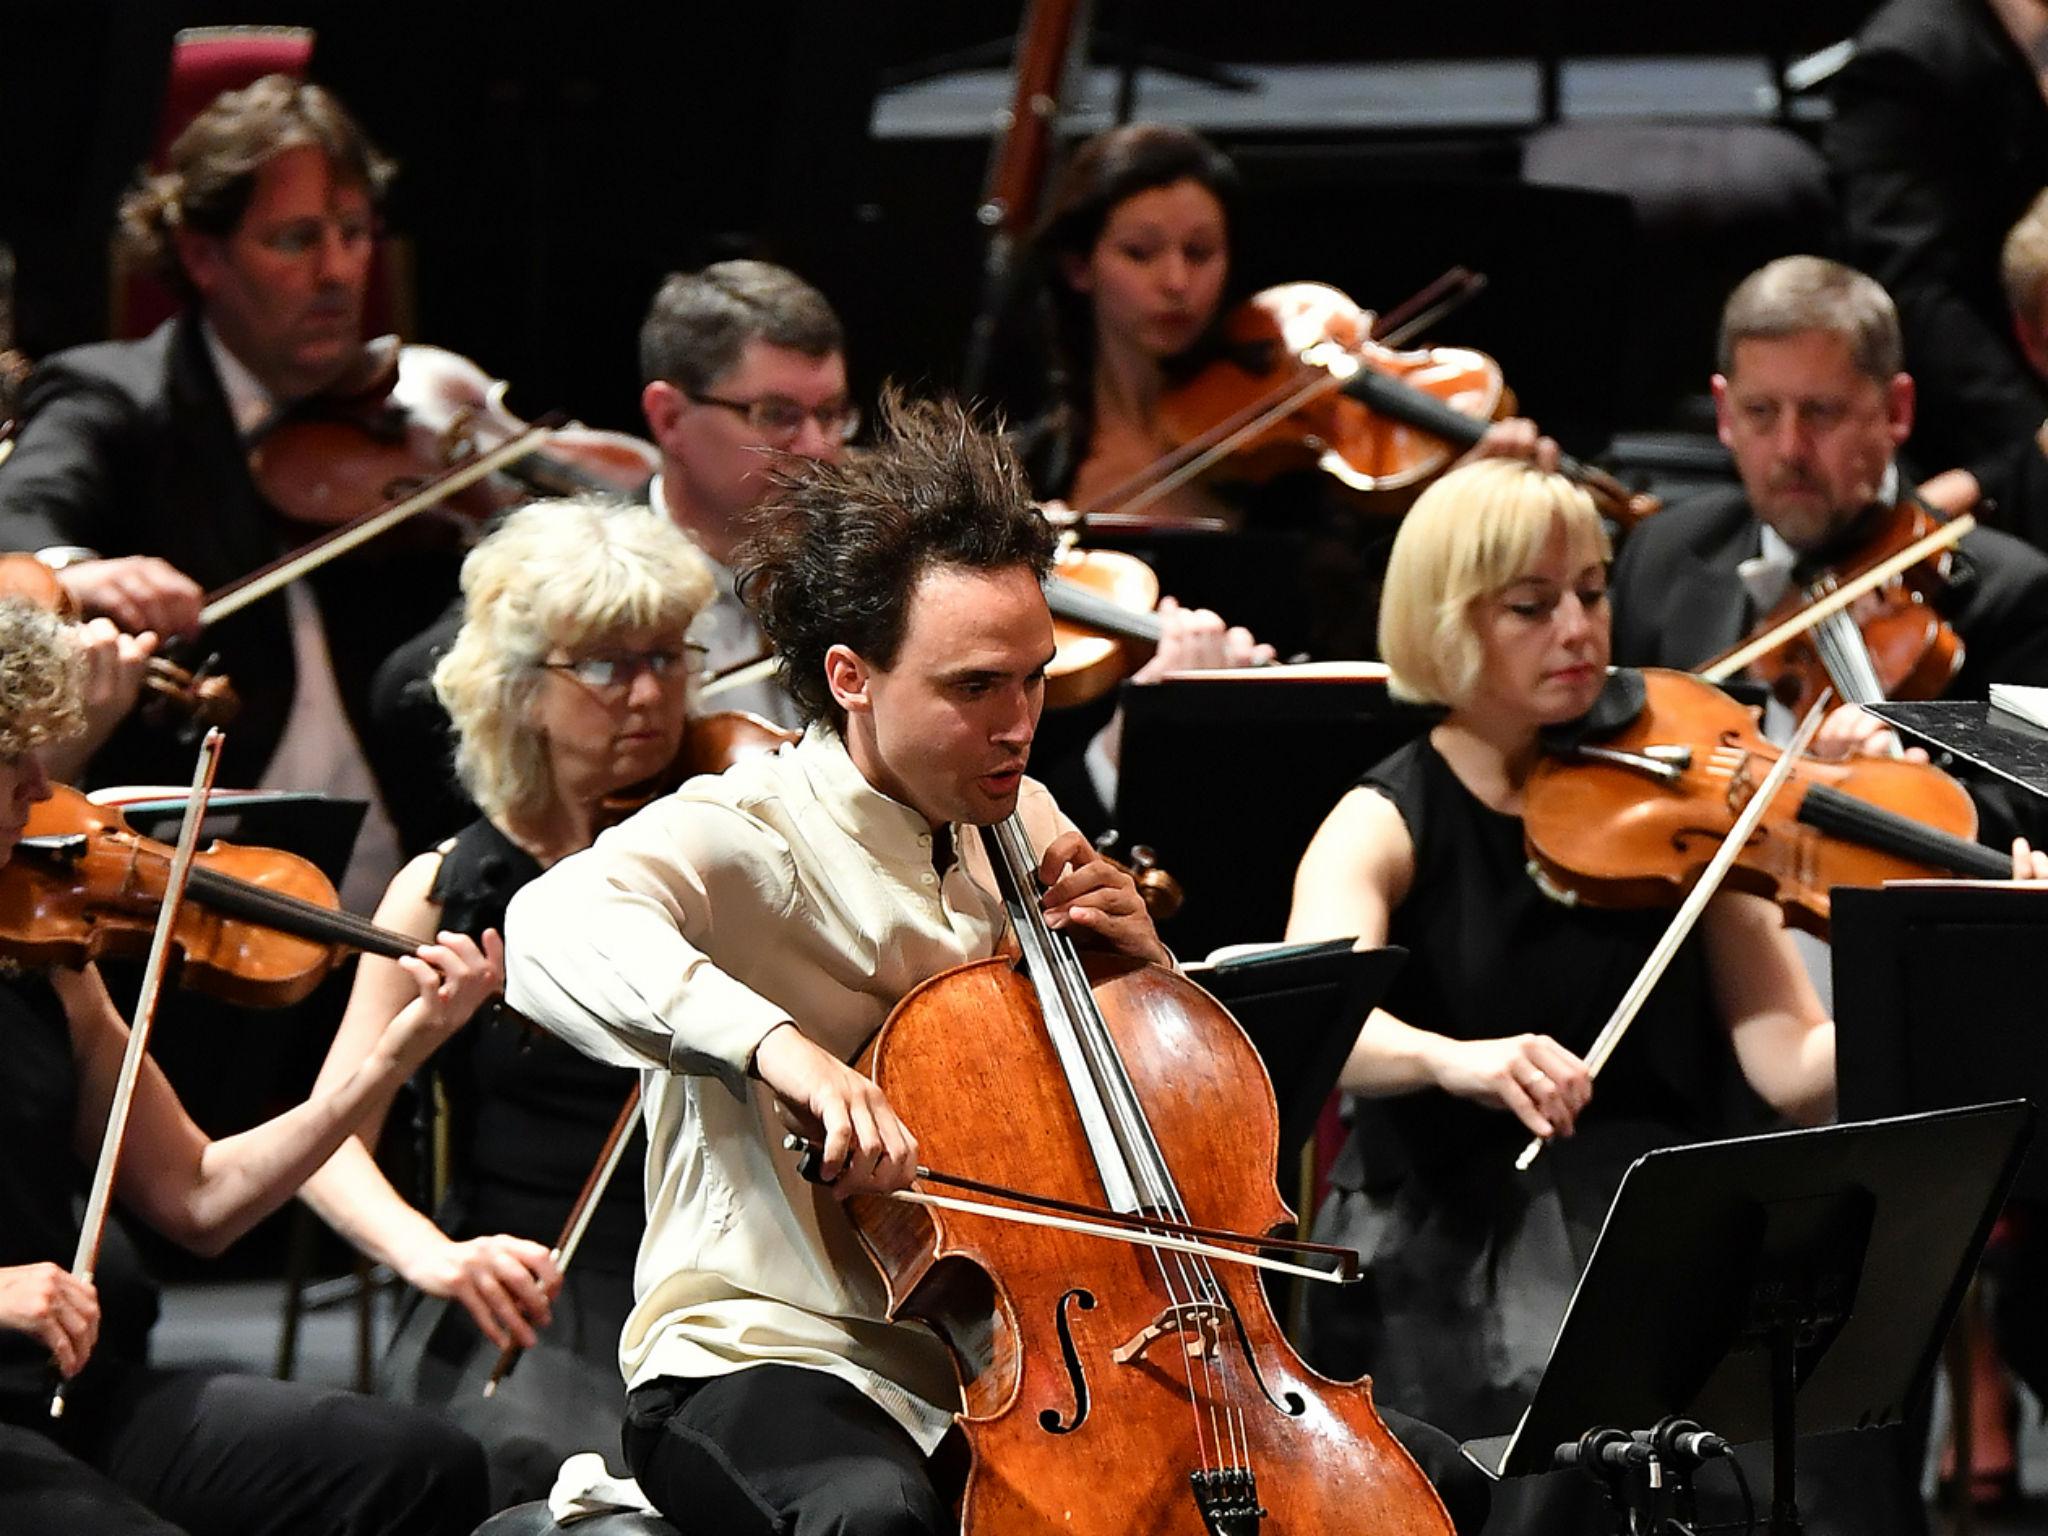 Cellist Leonard Elschenbroich performs the world premiere of Brian Elias’ Cello Concerto with the BBC National Orchestra of Wales under conductor Ryan Wigglesworth at the 2017 BBC Proms